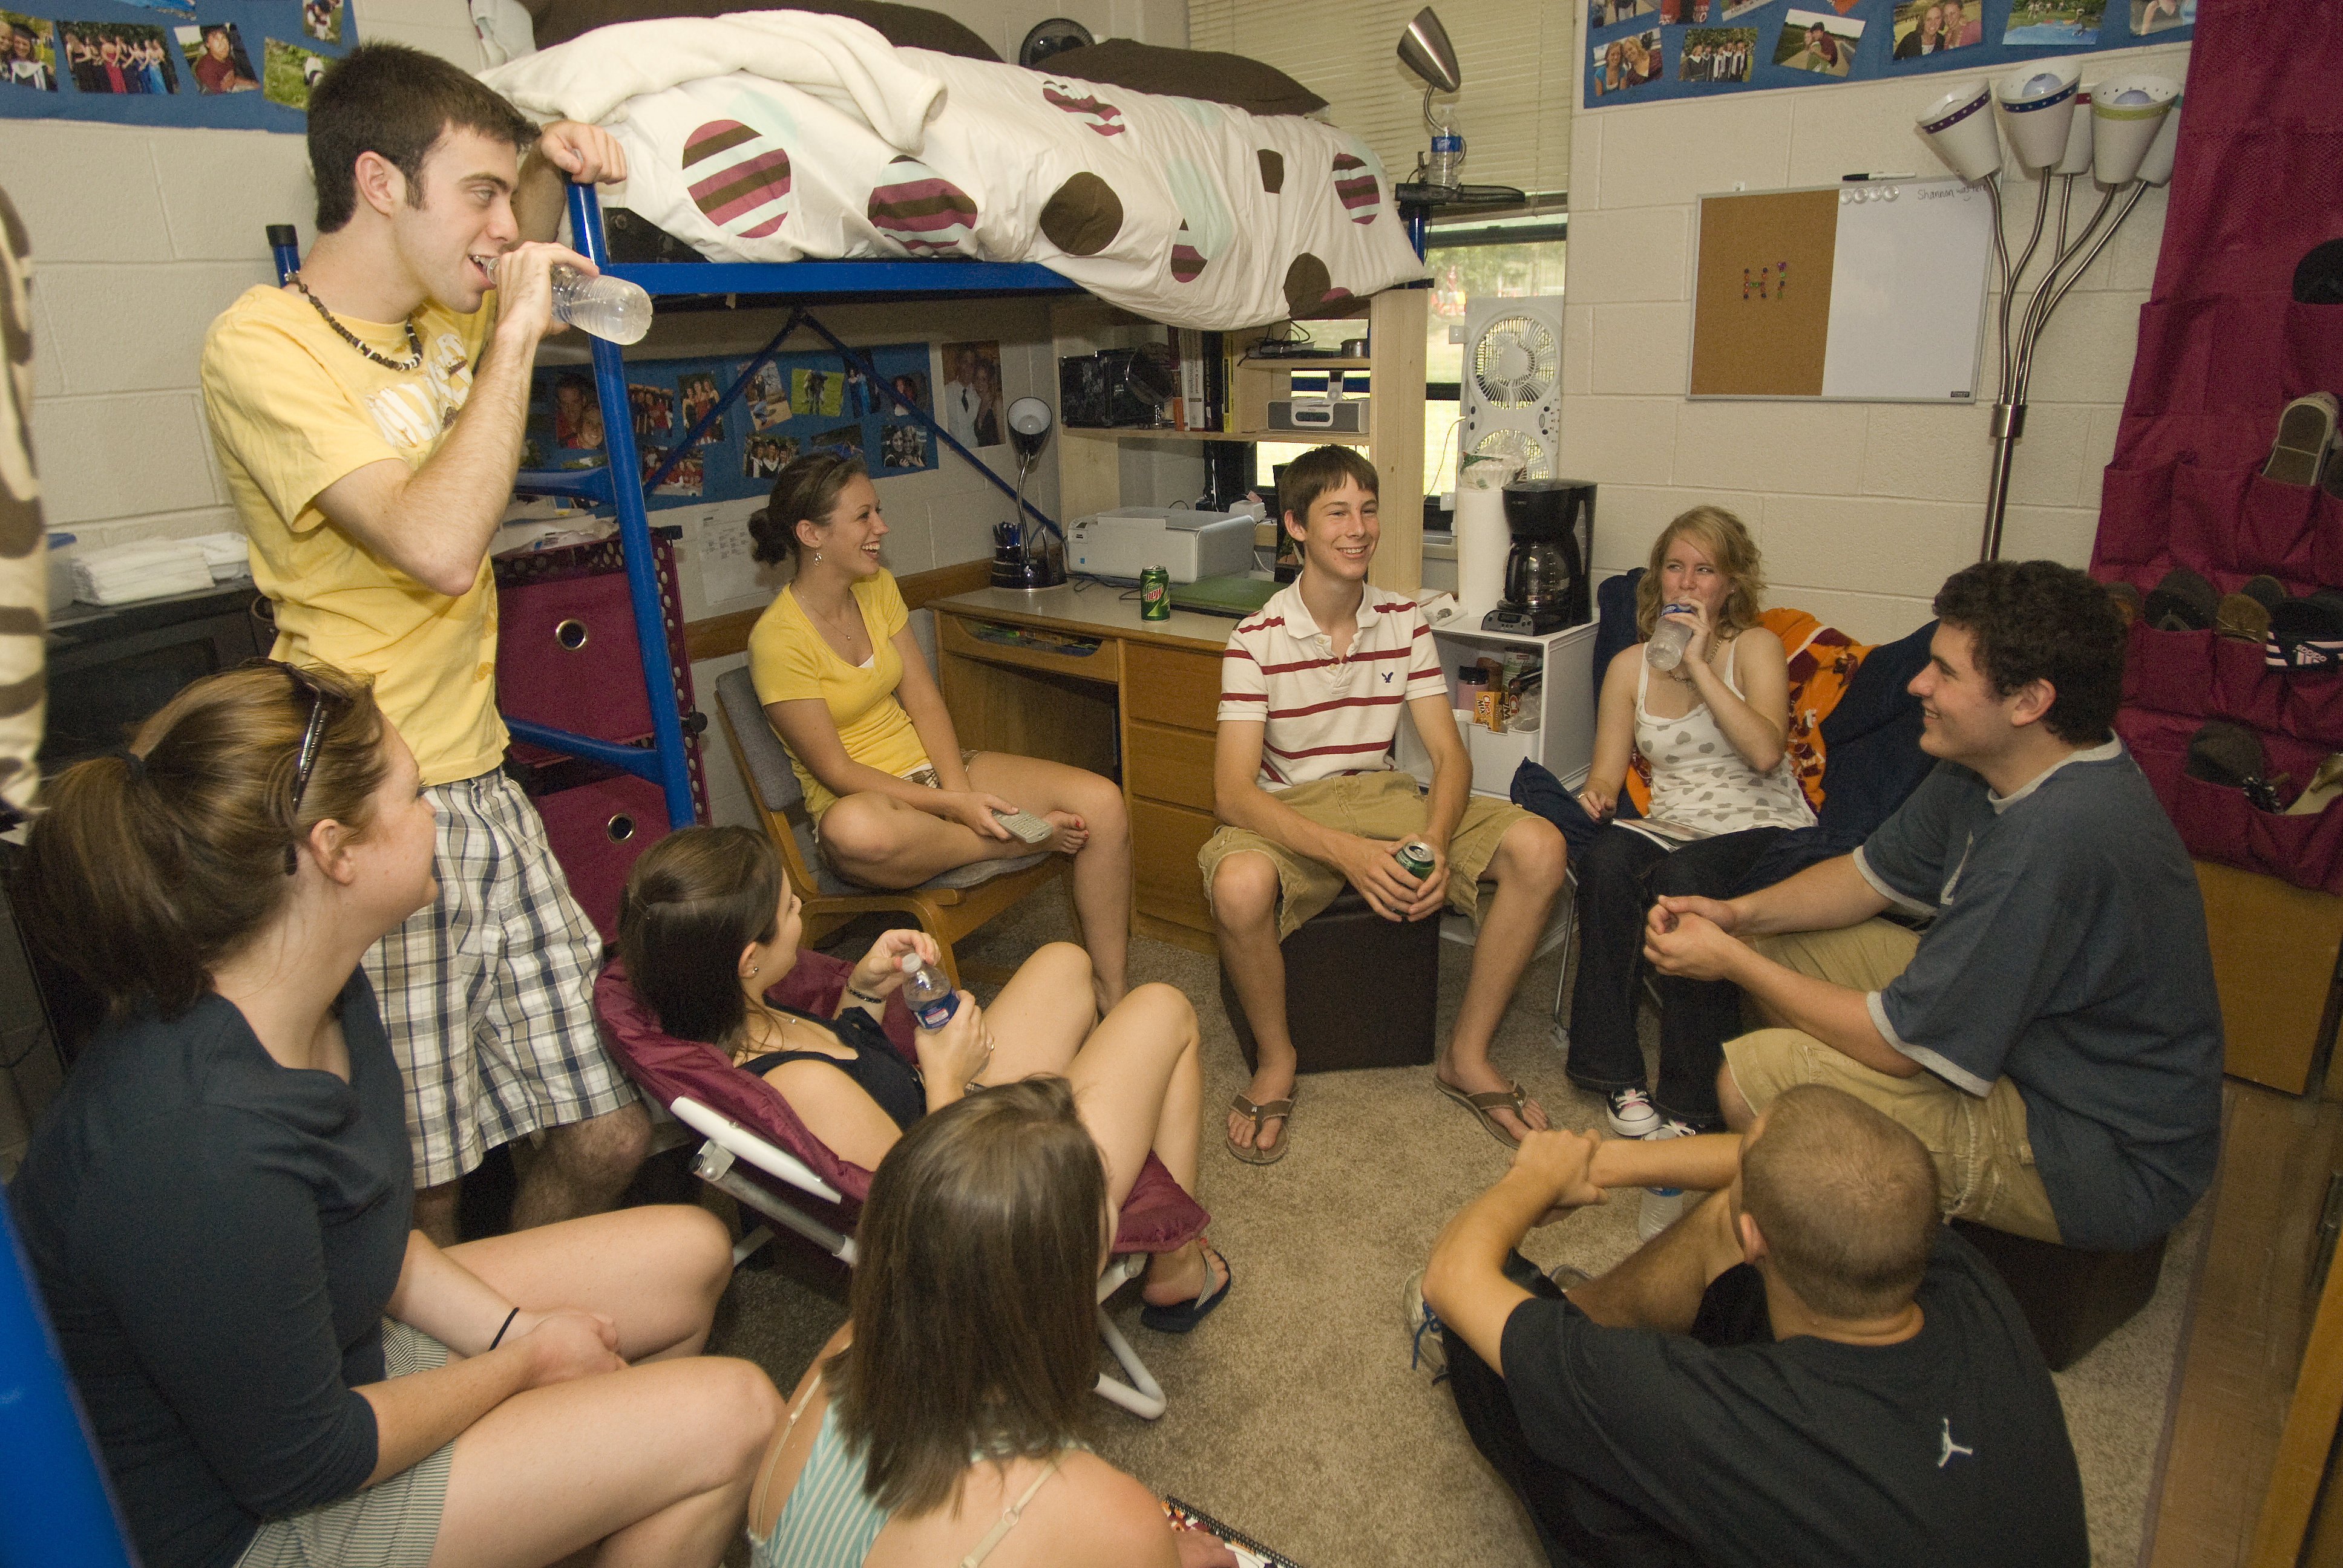 Students hang out in a room.